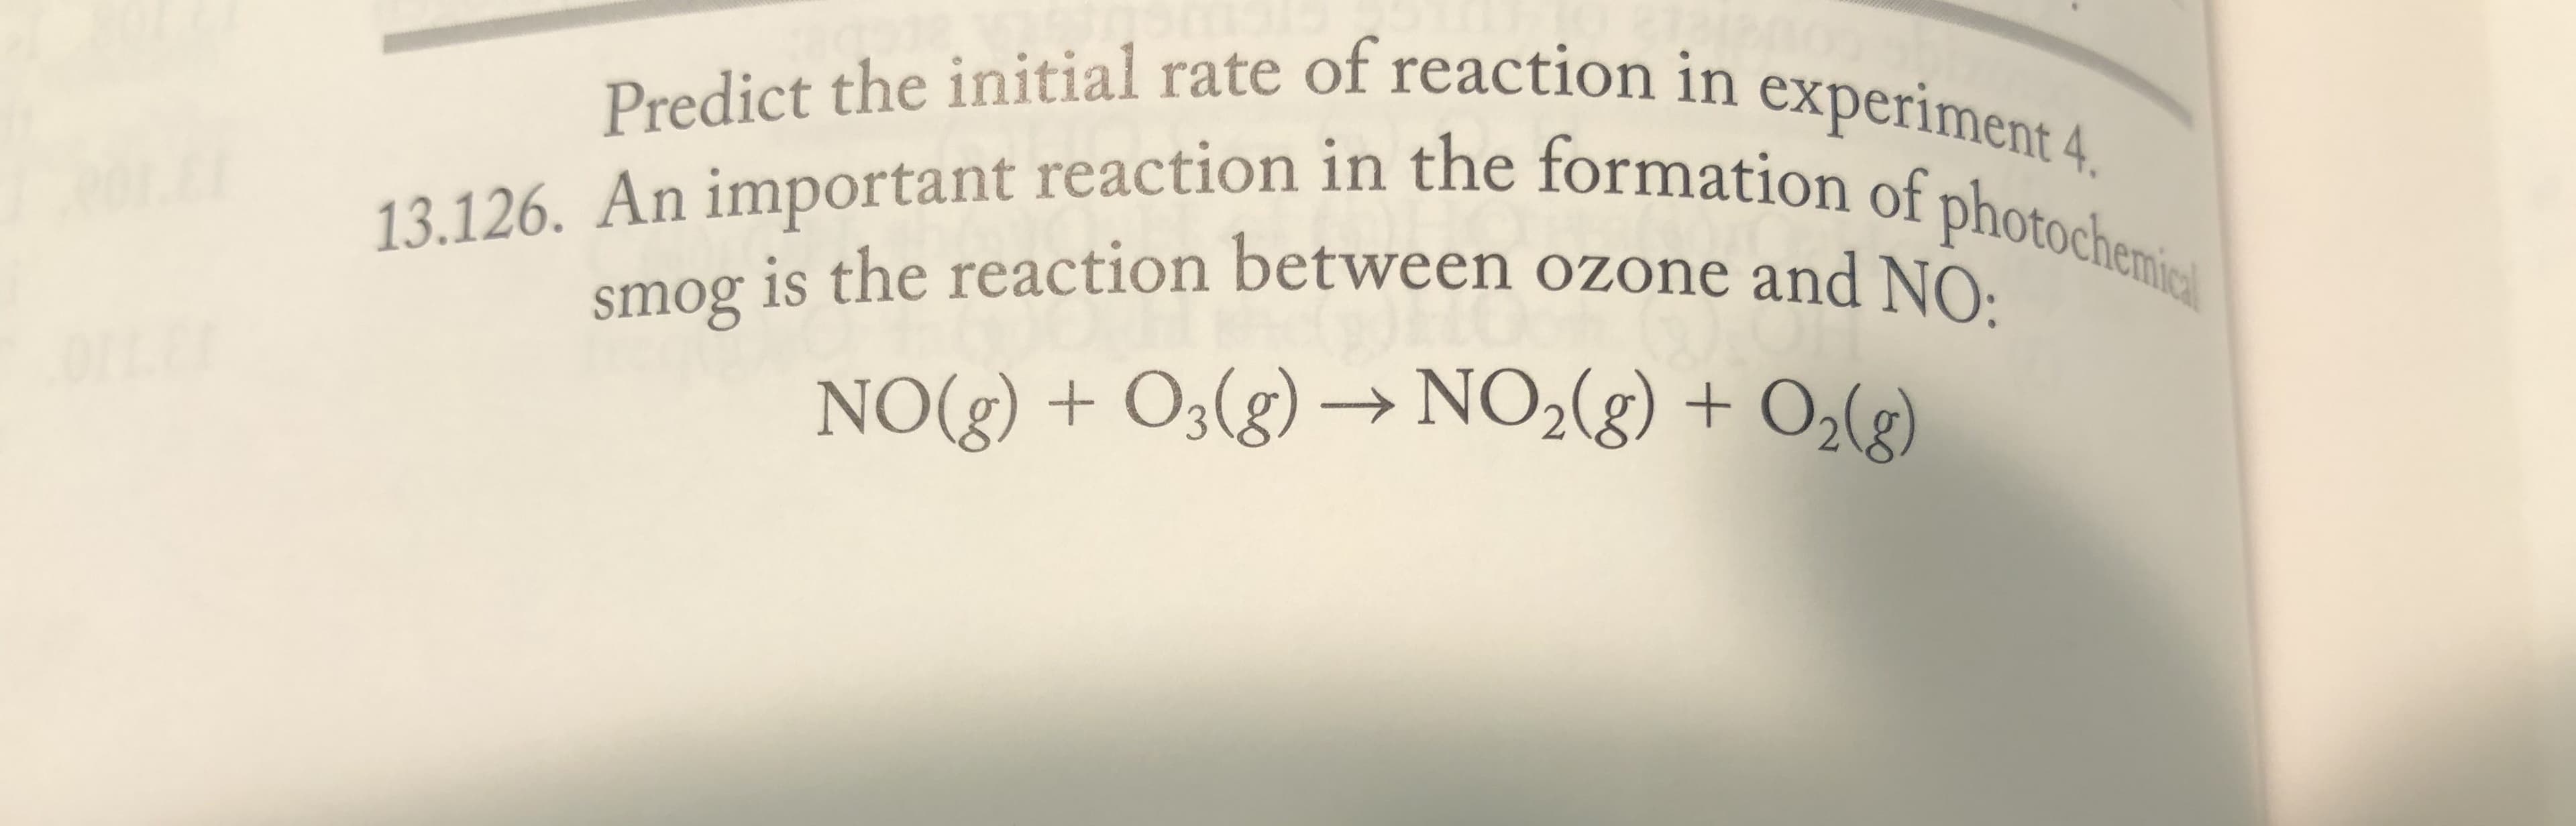 Predict the initial rate of reaction in experiment 4.
13.126. An important reaction in the formation of photochenmic
smog is the reaction between ozone and NO:
NO(g) + O3(g) → NO2(g) + O,(g)
